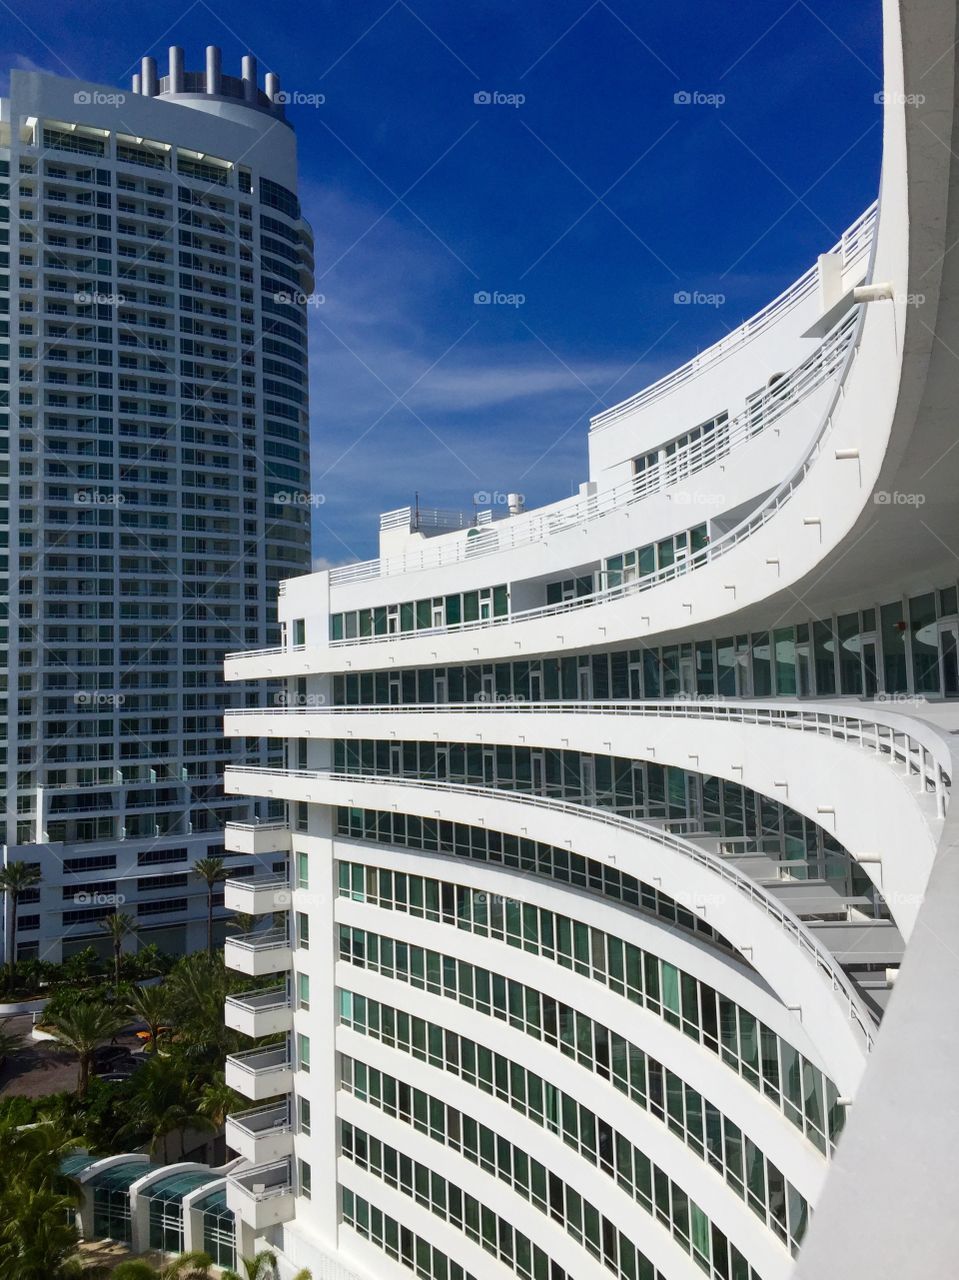 Miami Beach . Hotel Fontainebleau seen from balcony of room